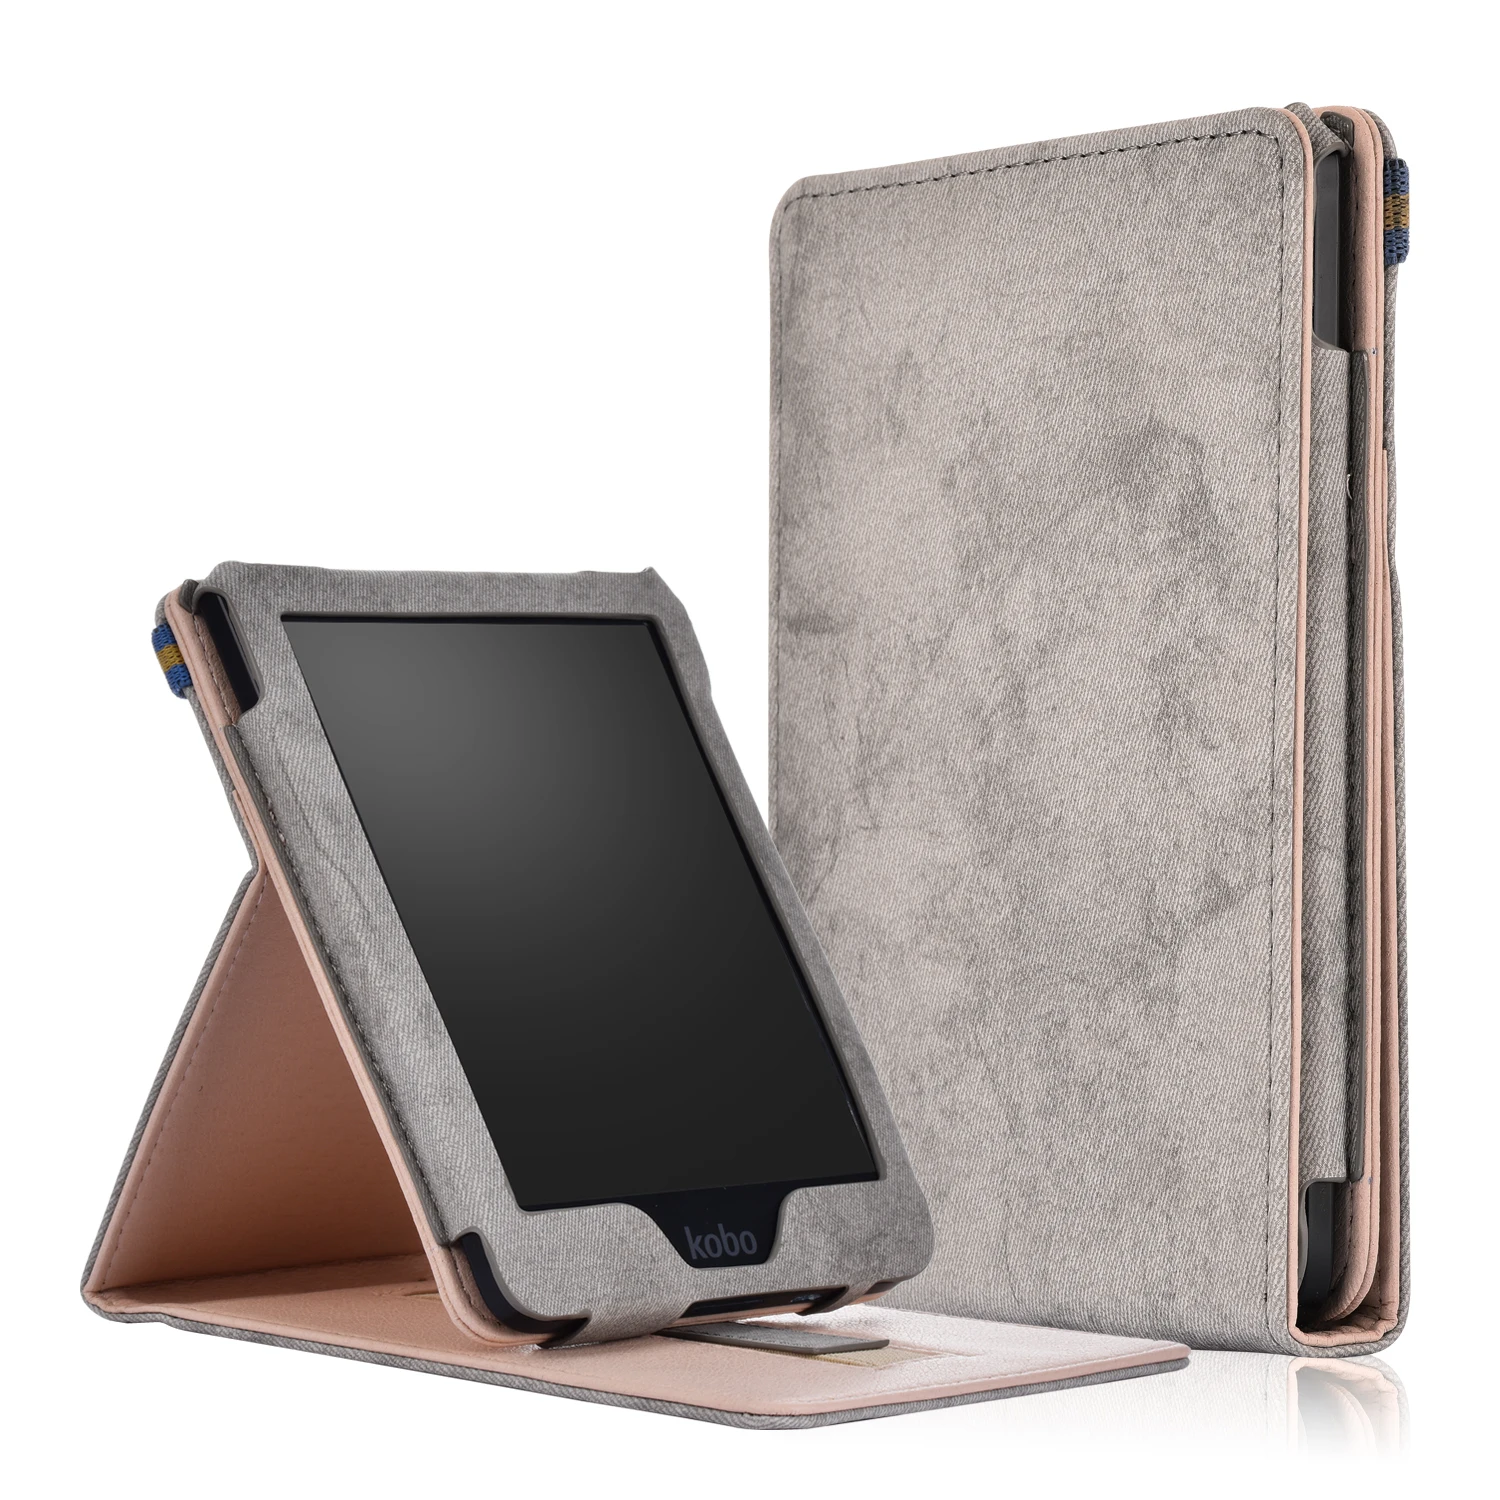 PU leather stand smart case for new Kobo clara HD 6 cover case for funda kobo clara HD N249 with hand holder